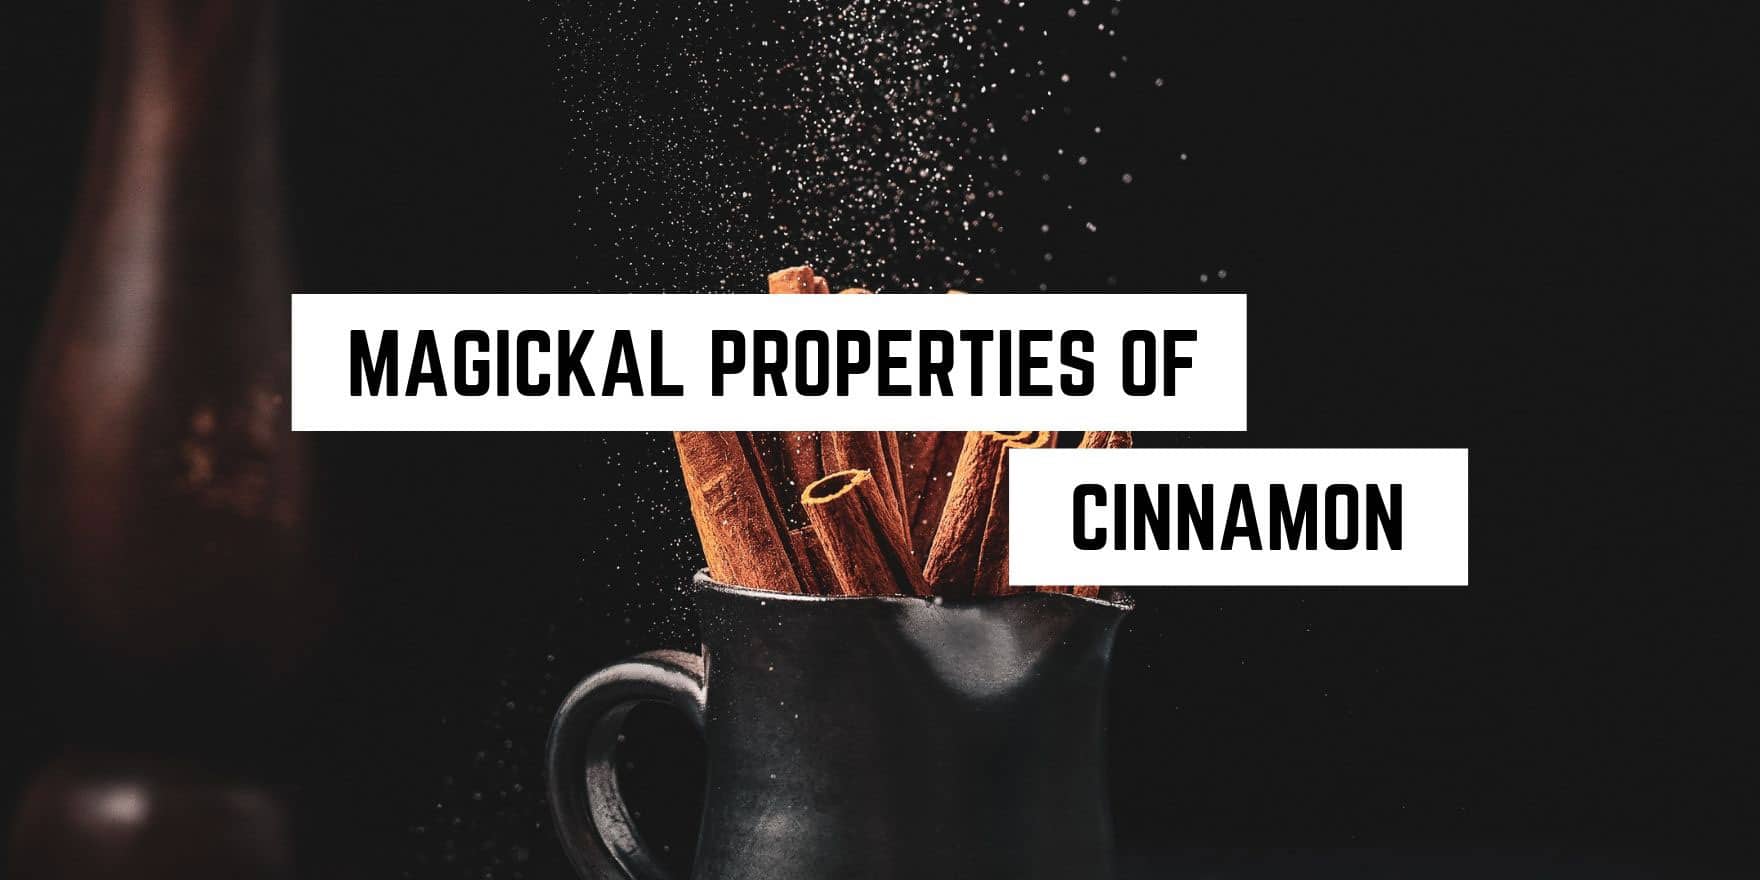 Cinnamon sticks casting a spell with their aromatic dust in a mystic, occult kitchen atmosphere.